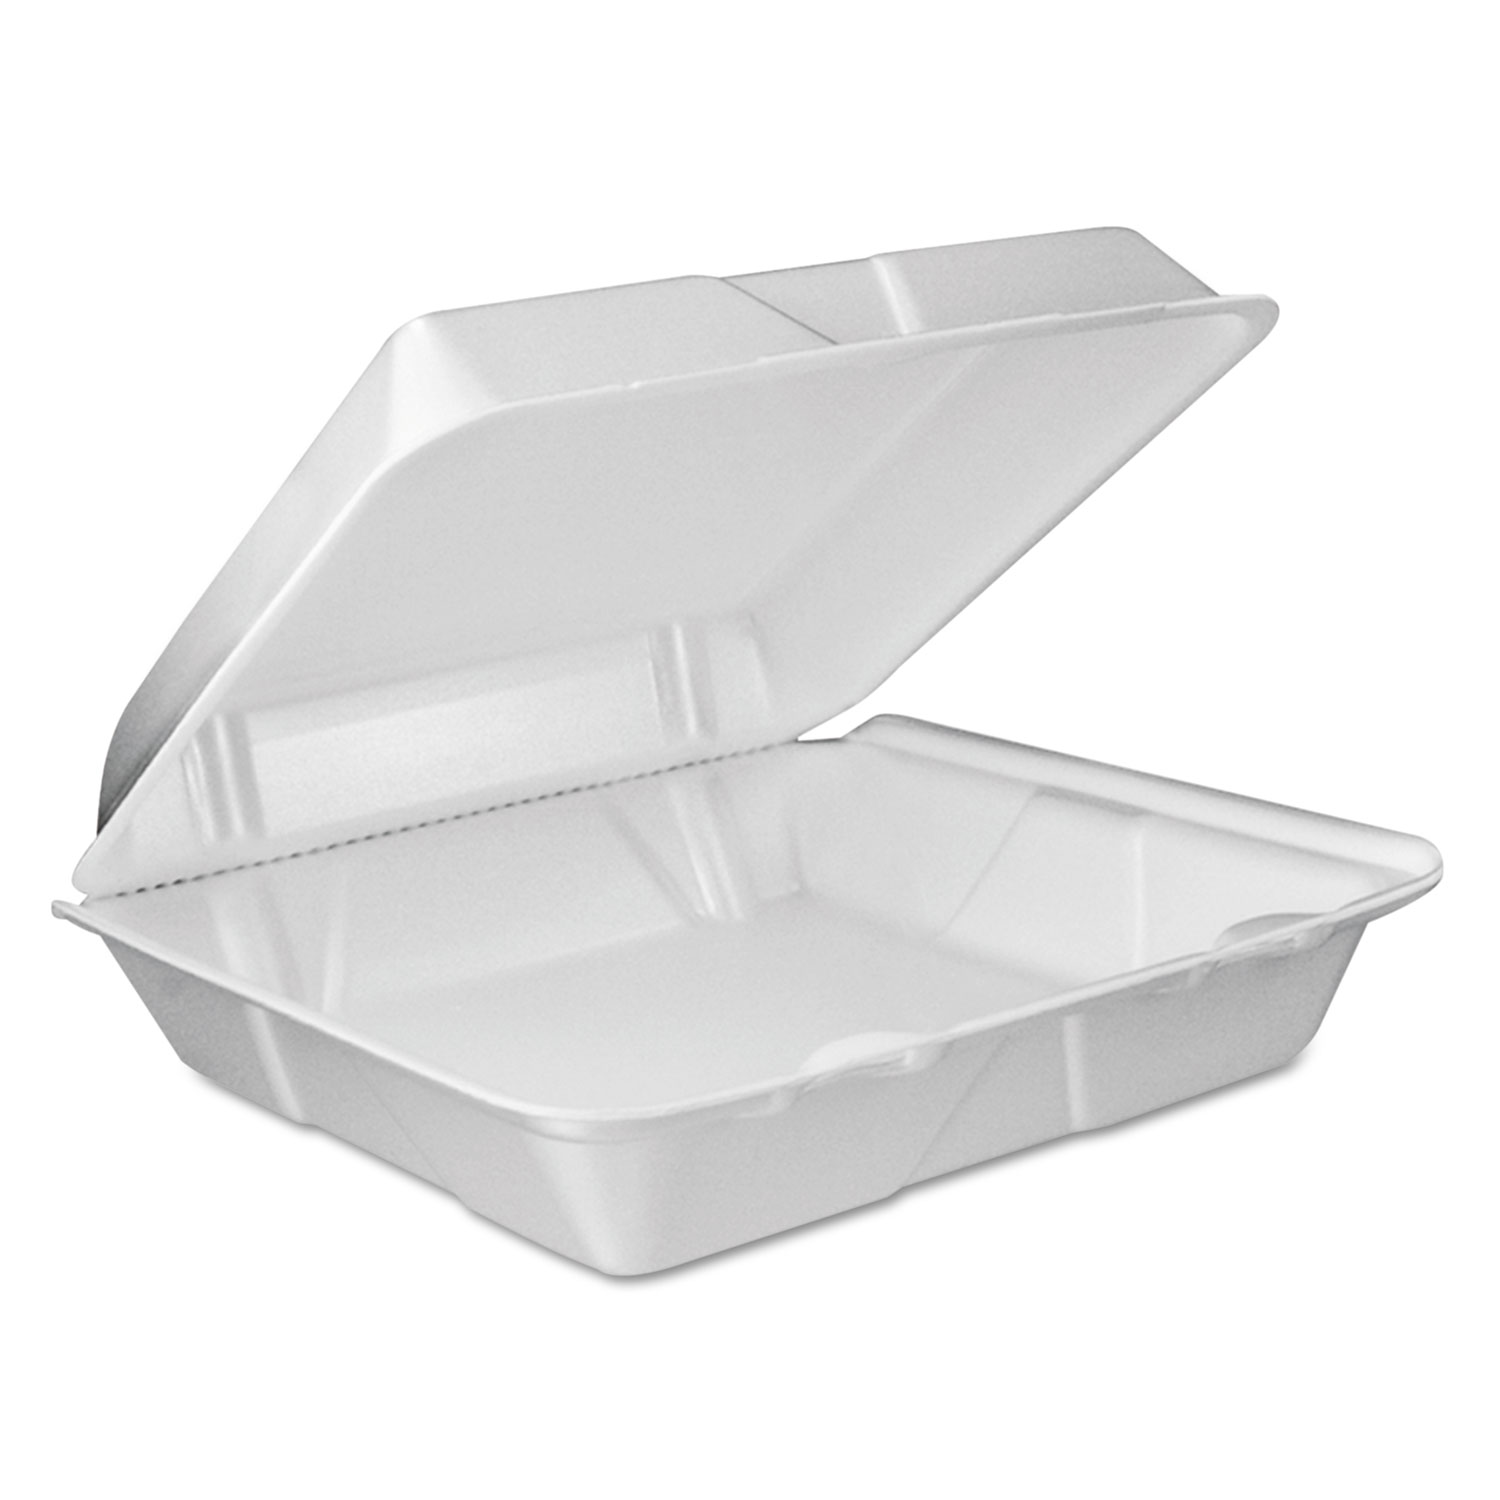  Dart 90HTPF1VR Foam Vented Hinged Lid Containers, 9w x 9 2/5d x 3h, White, 100/PK, 2 PK/CT (DCC90HTPF1VR) 